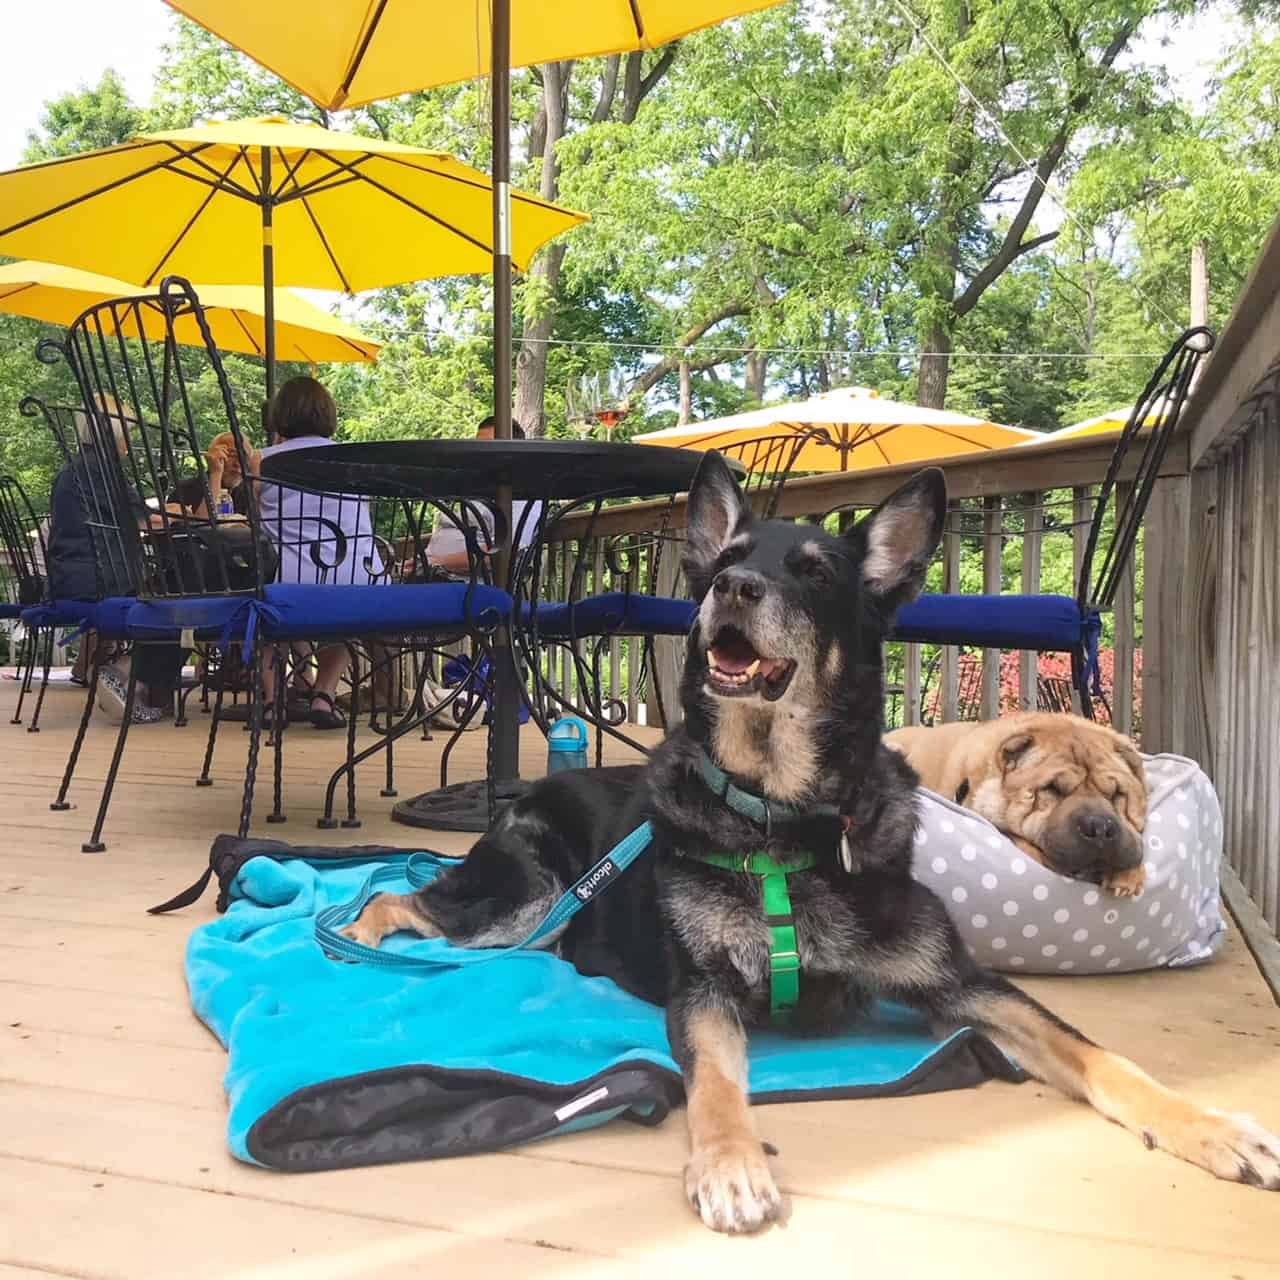 German Shepherd Dog and Shar-pei on the patio at a pet friendly winery in the Finger Lakes, NY